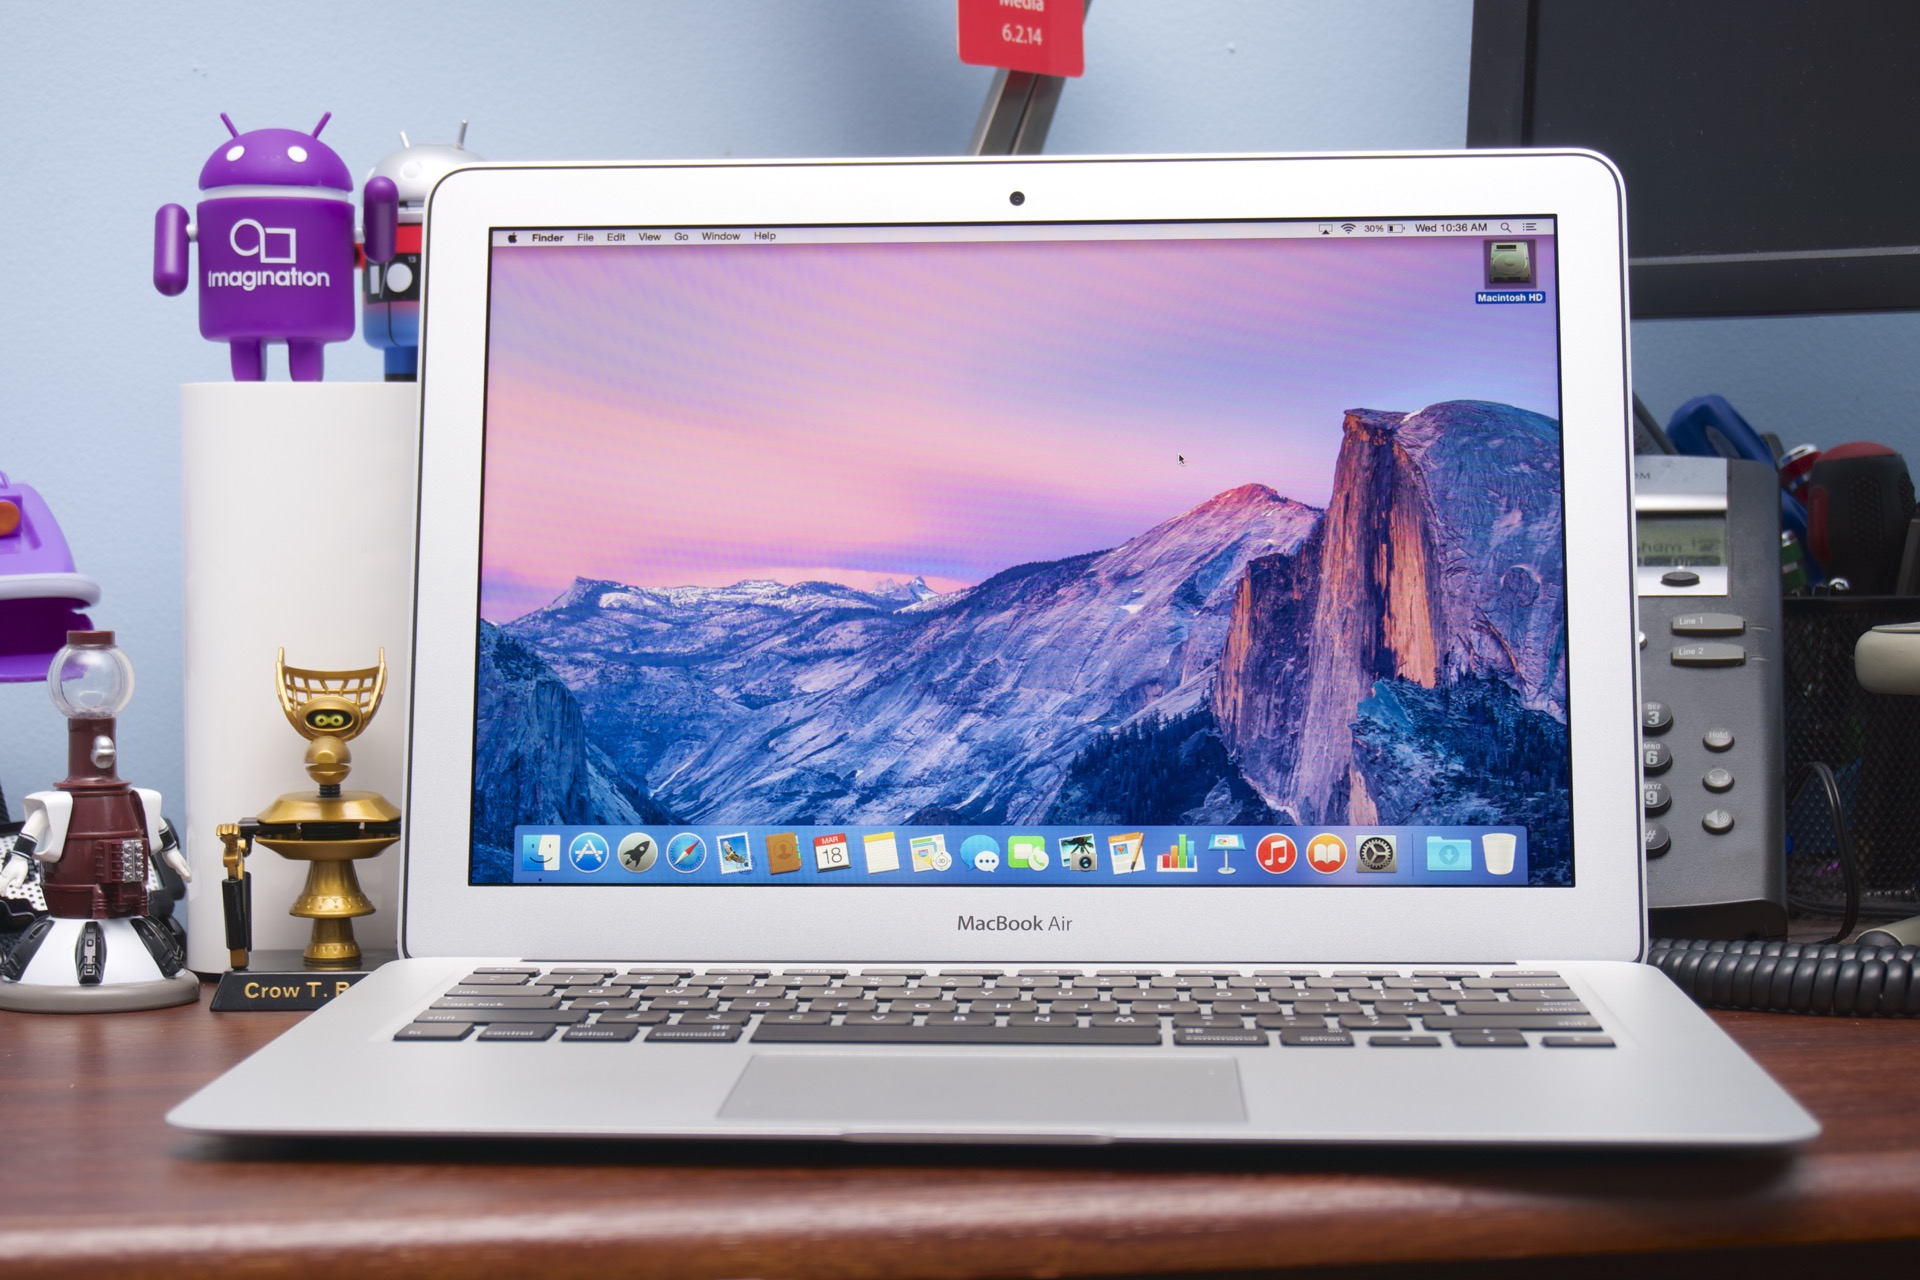 Yes, the 2015 MacBook Air supports 4K displays at 60Hz | Ars Technica